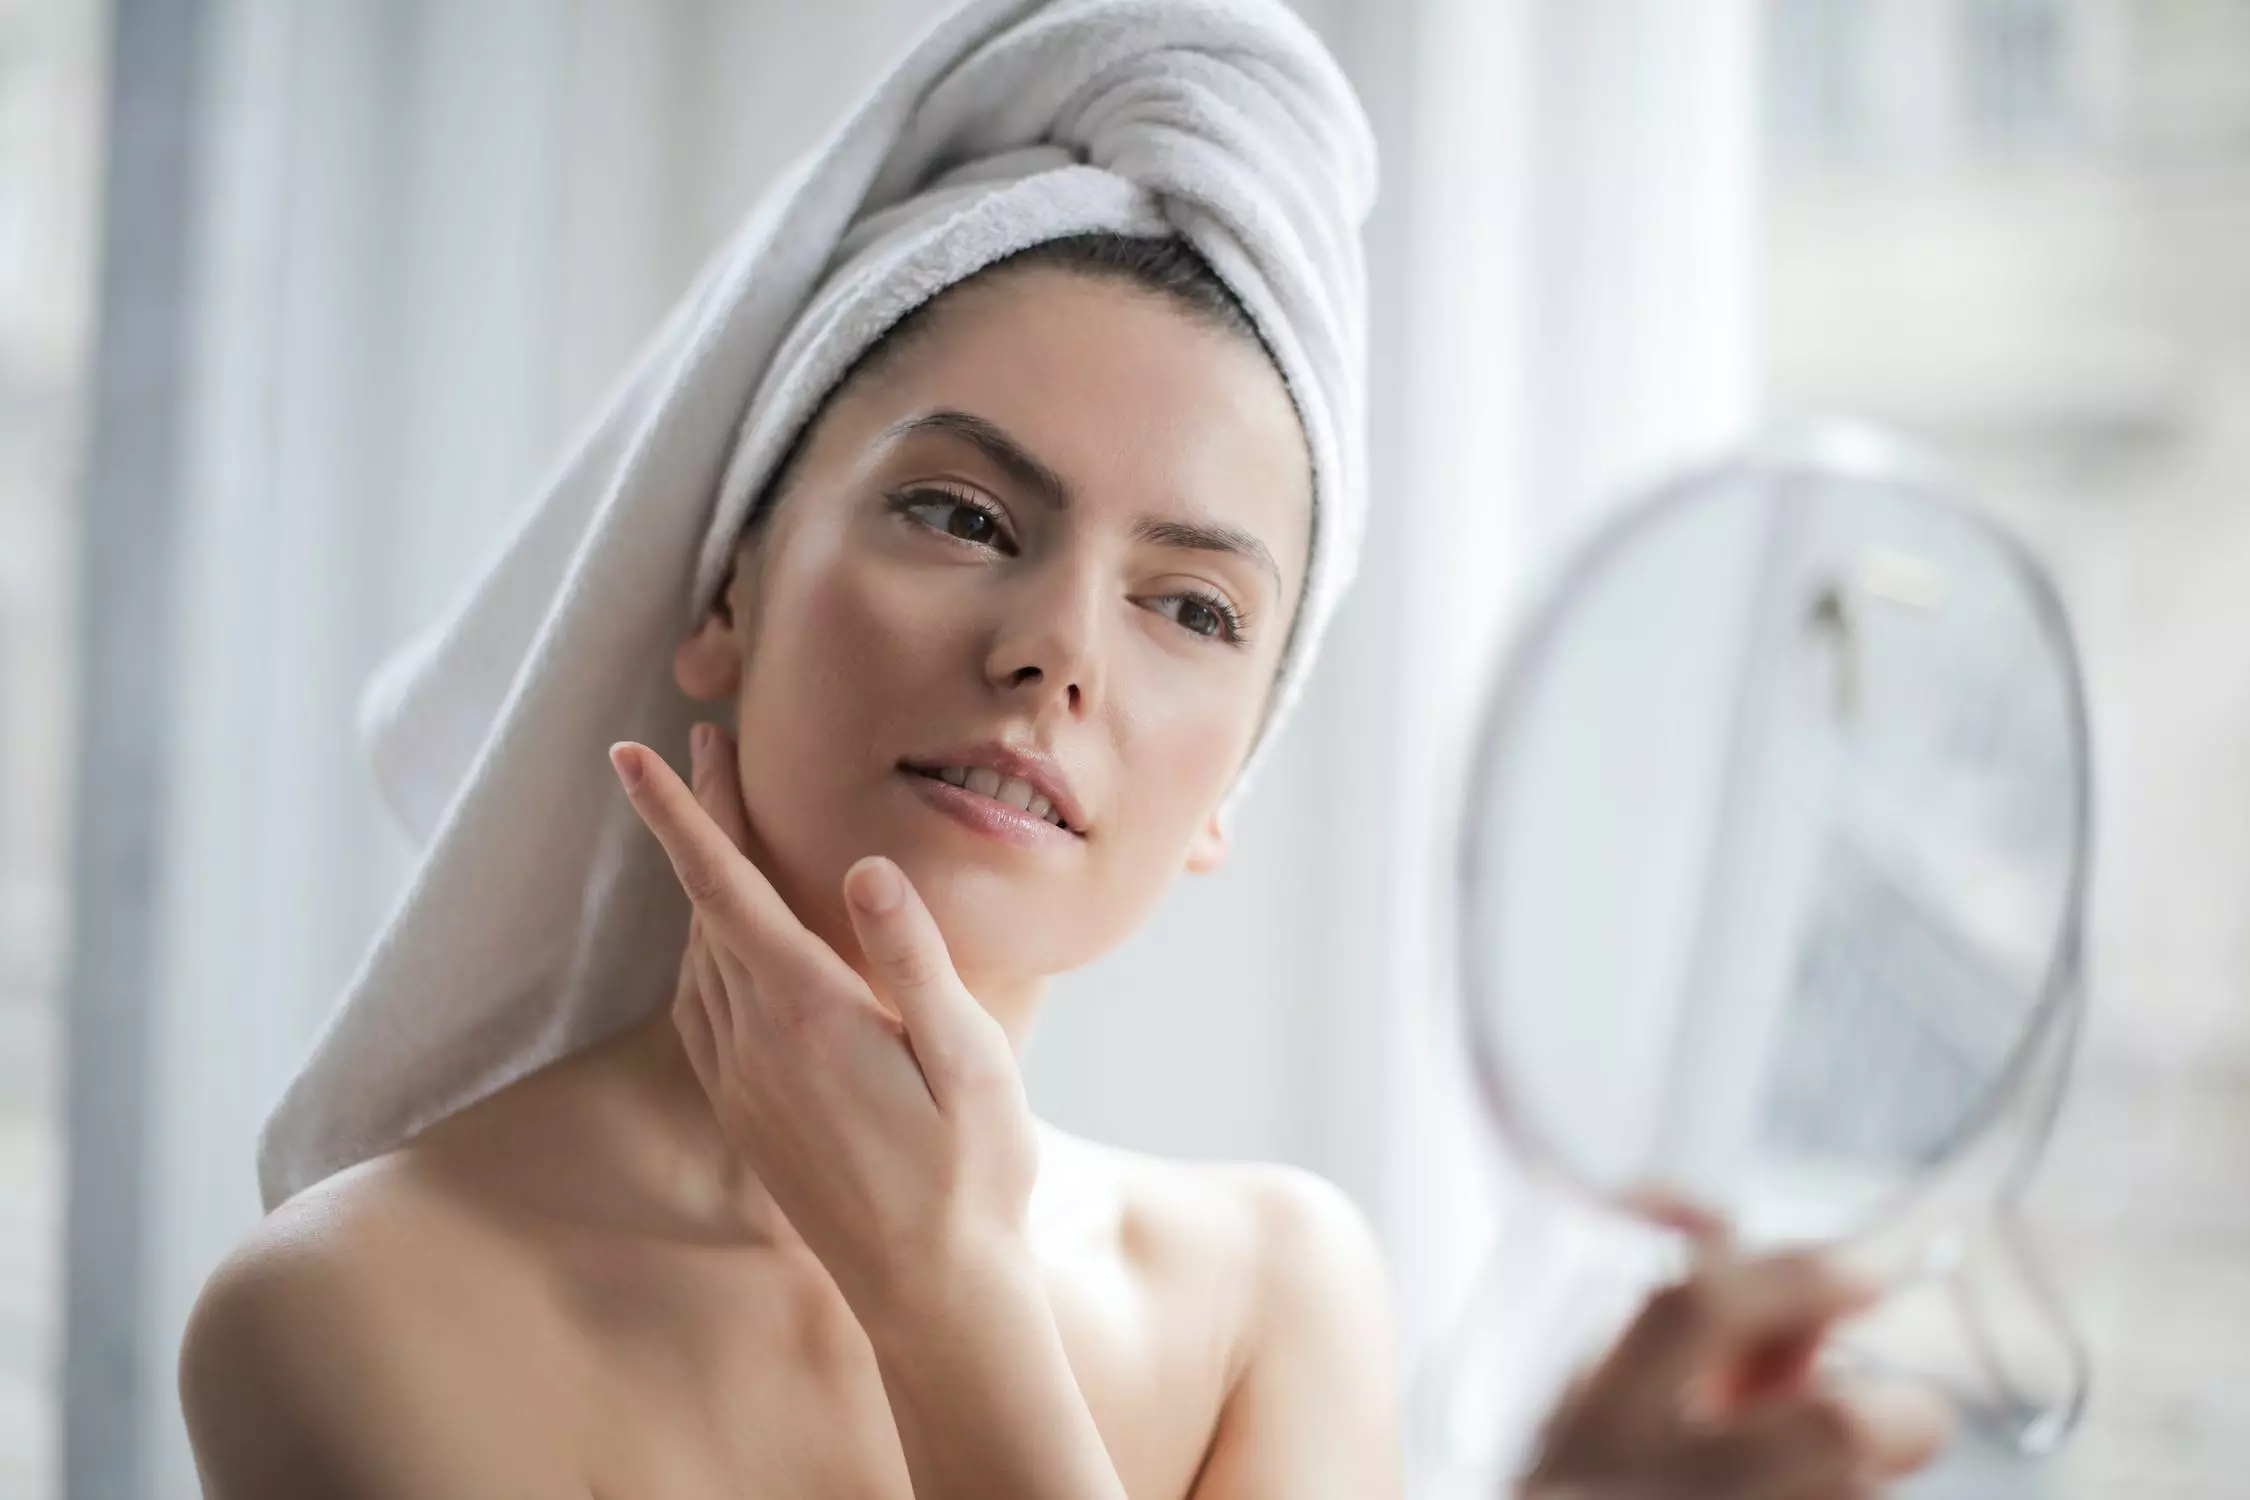 6 Tips To Keep Your Skin Younger and Healthier